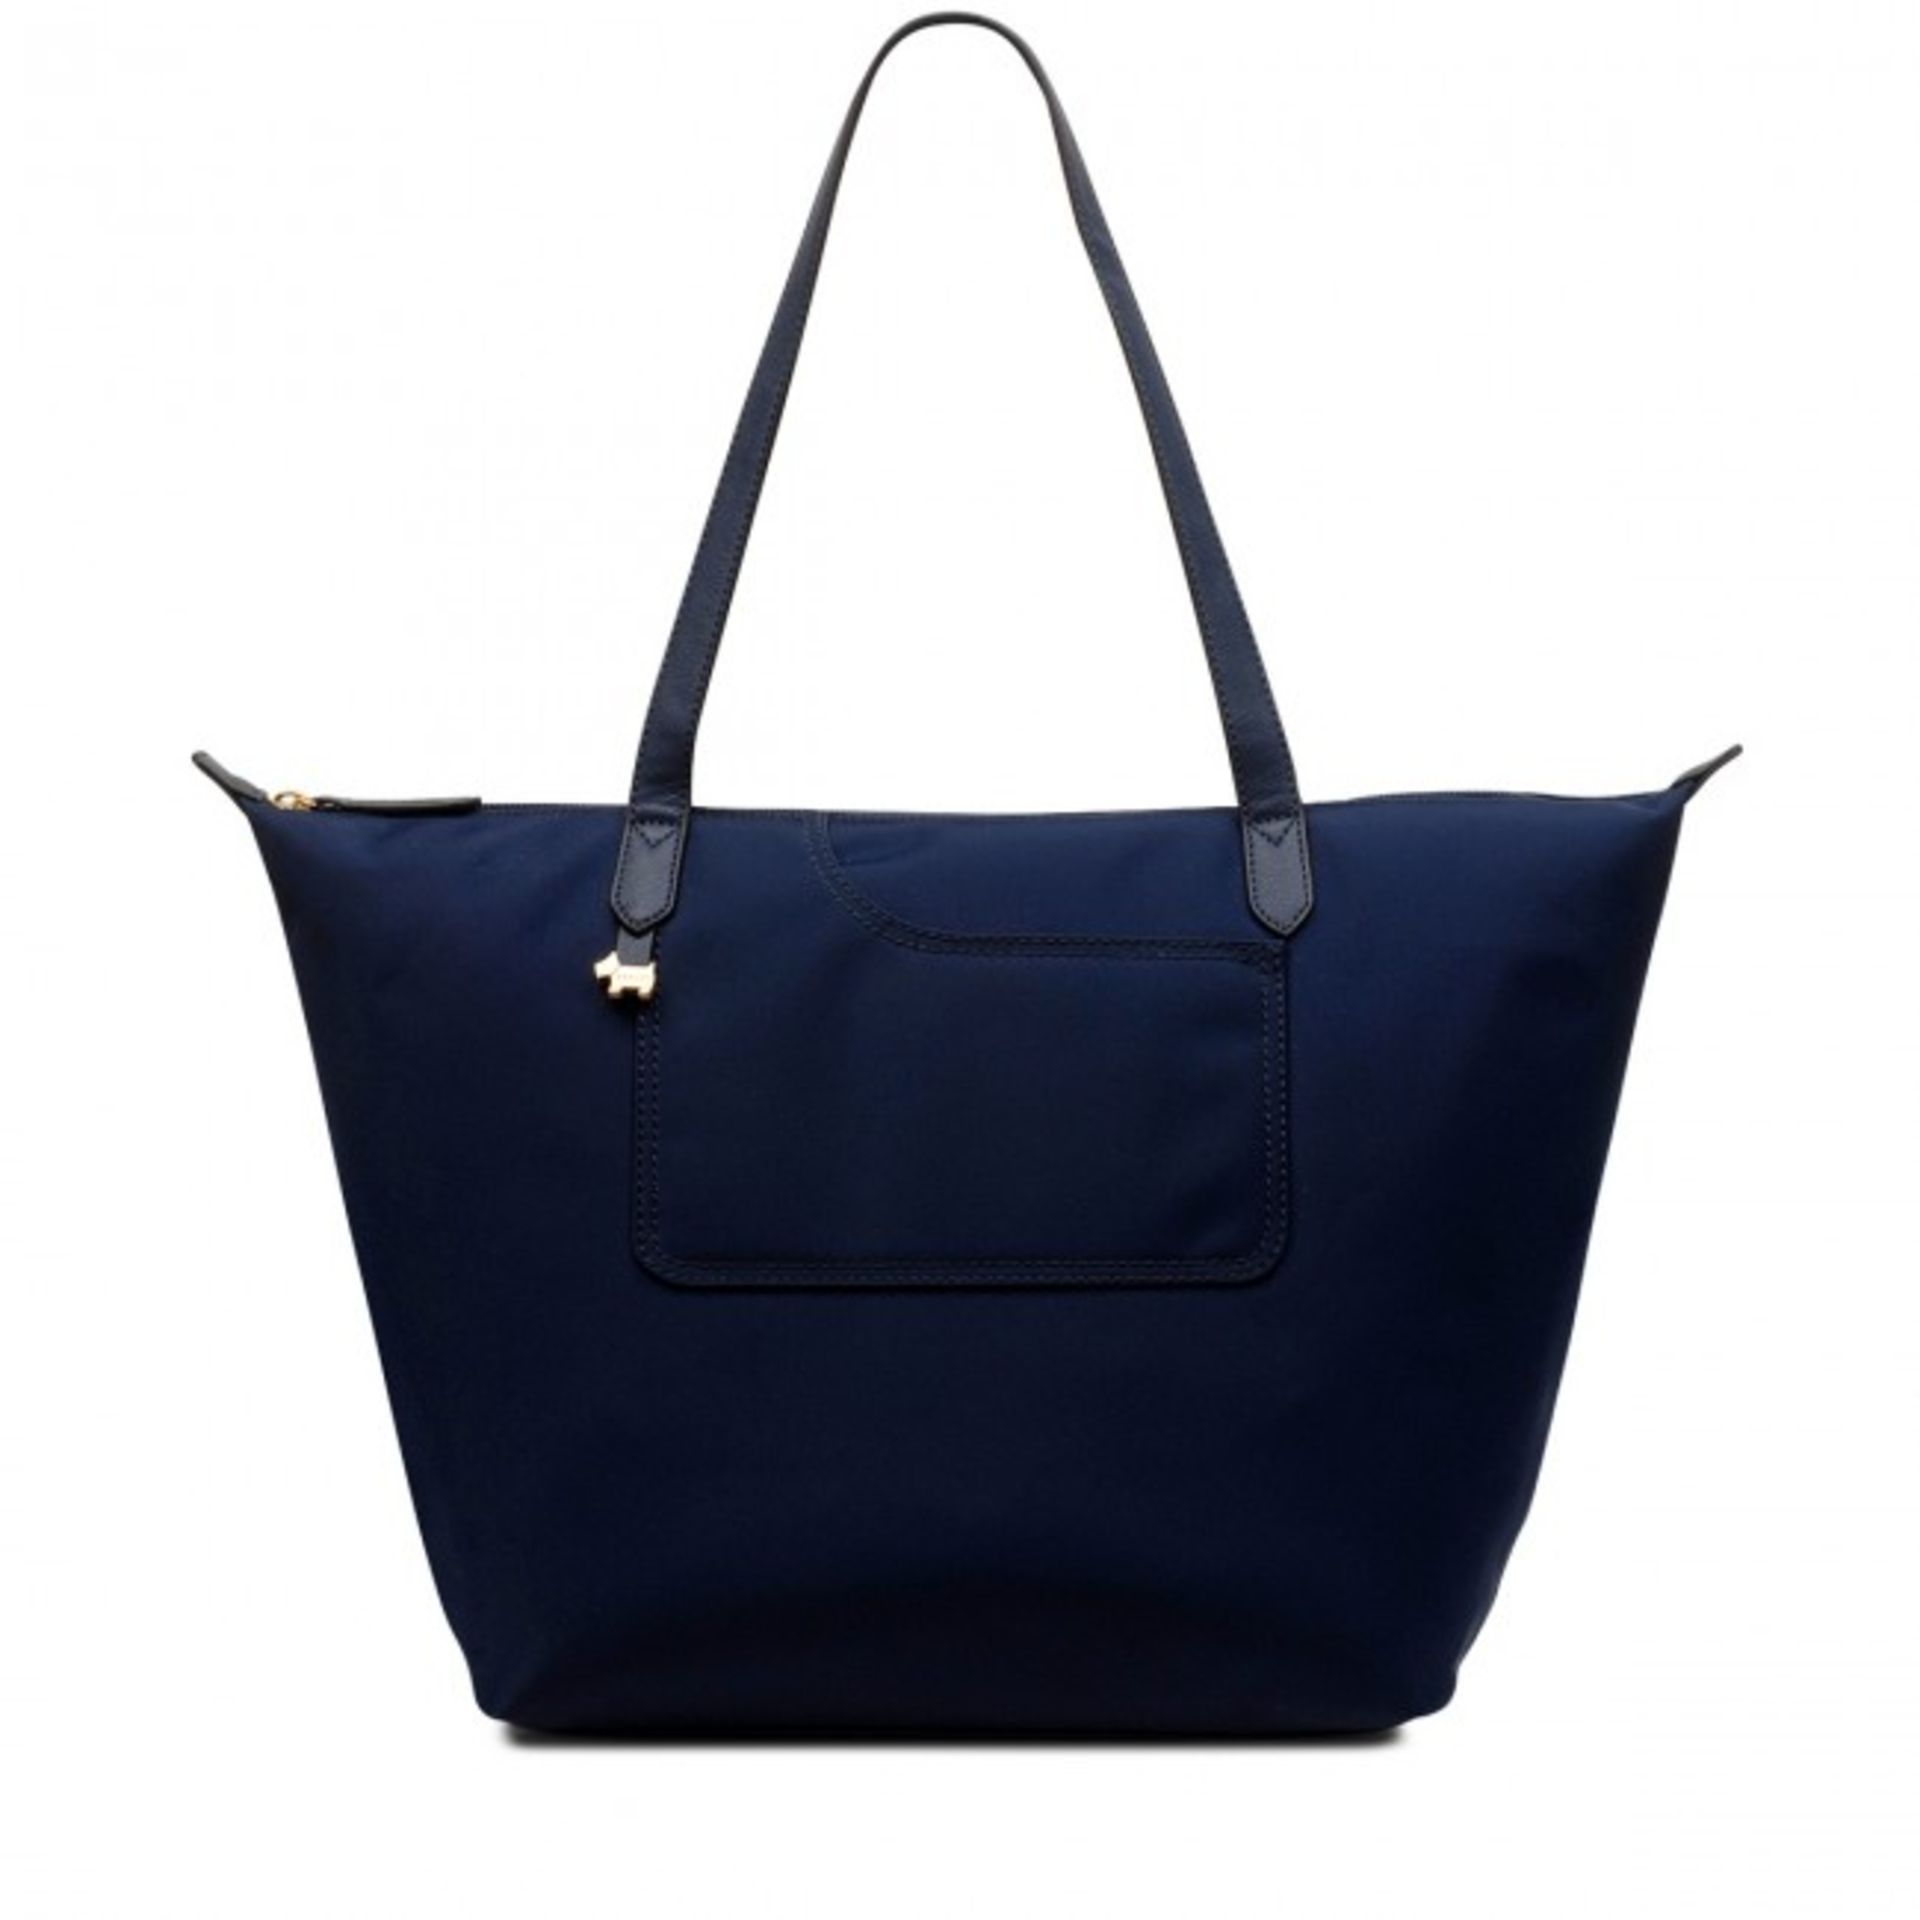 BRAND NEW RADLEY Rdly L ZIP TOP TOTE SAPPHIRE (2671) RRP £69 P3-4